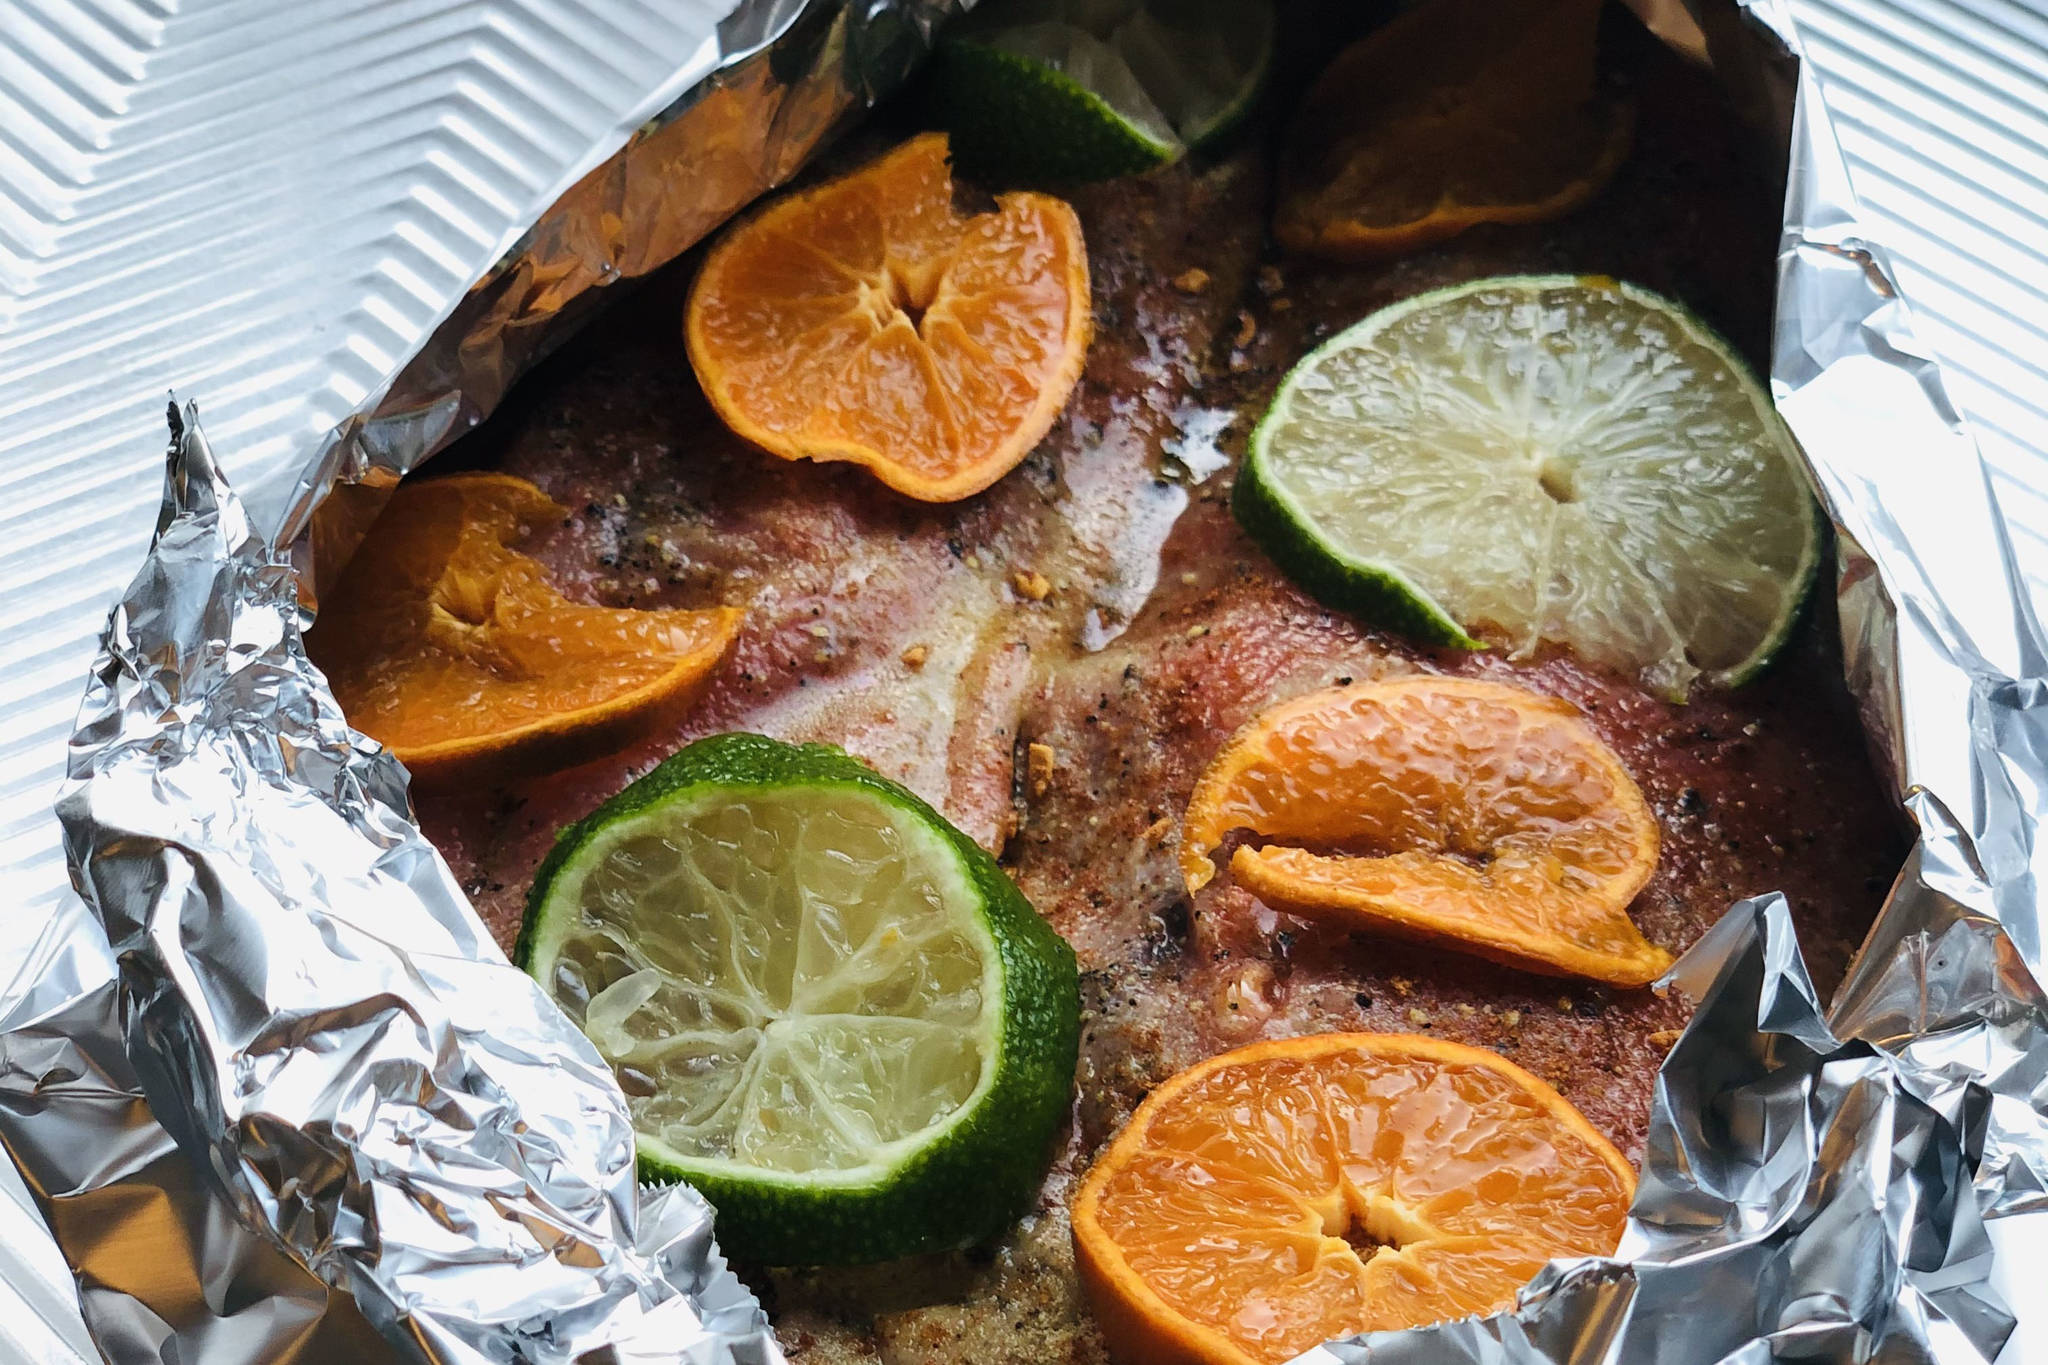 Fresh citrus and pantry staples like taco seasoning and granulated garlic make for an easy and delicious baked salmon that’s ready to be enjoyed inside a taco, photographed on March 23, 2021 in Anchorage, Alaska. (Photo by Victoria Petersen/Peninsula Clarion)